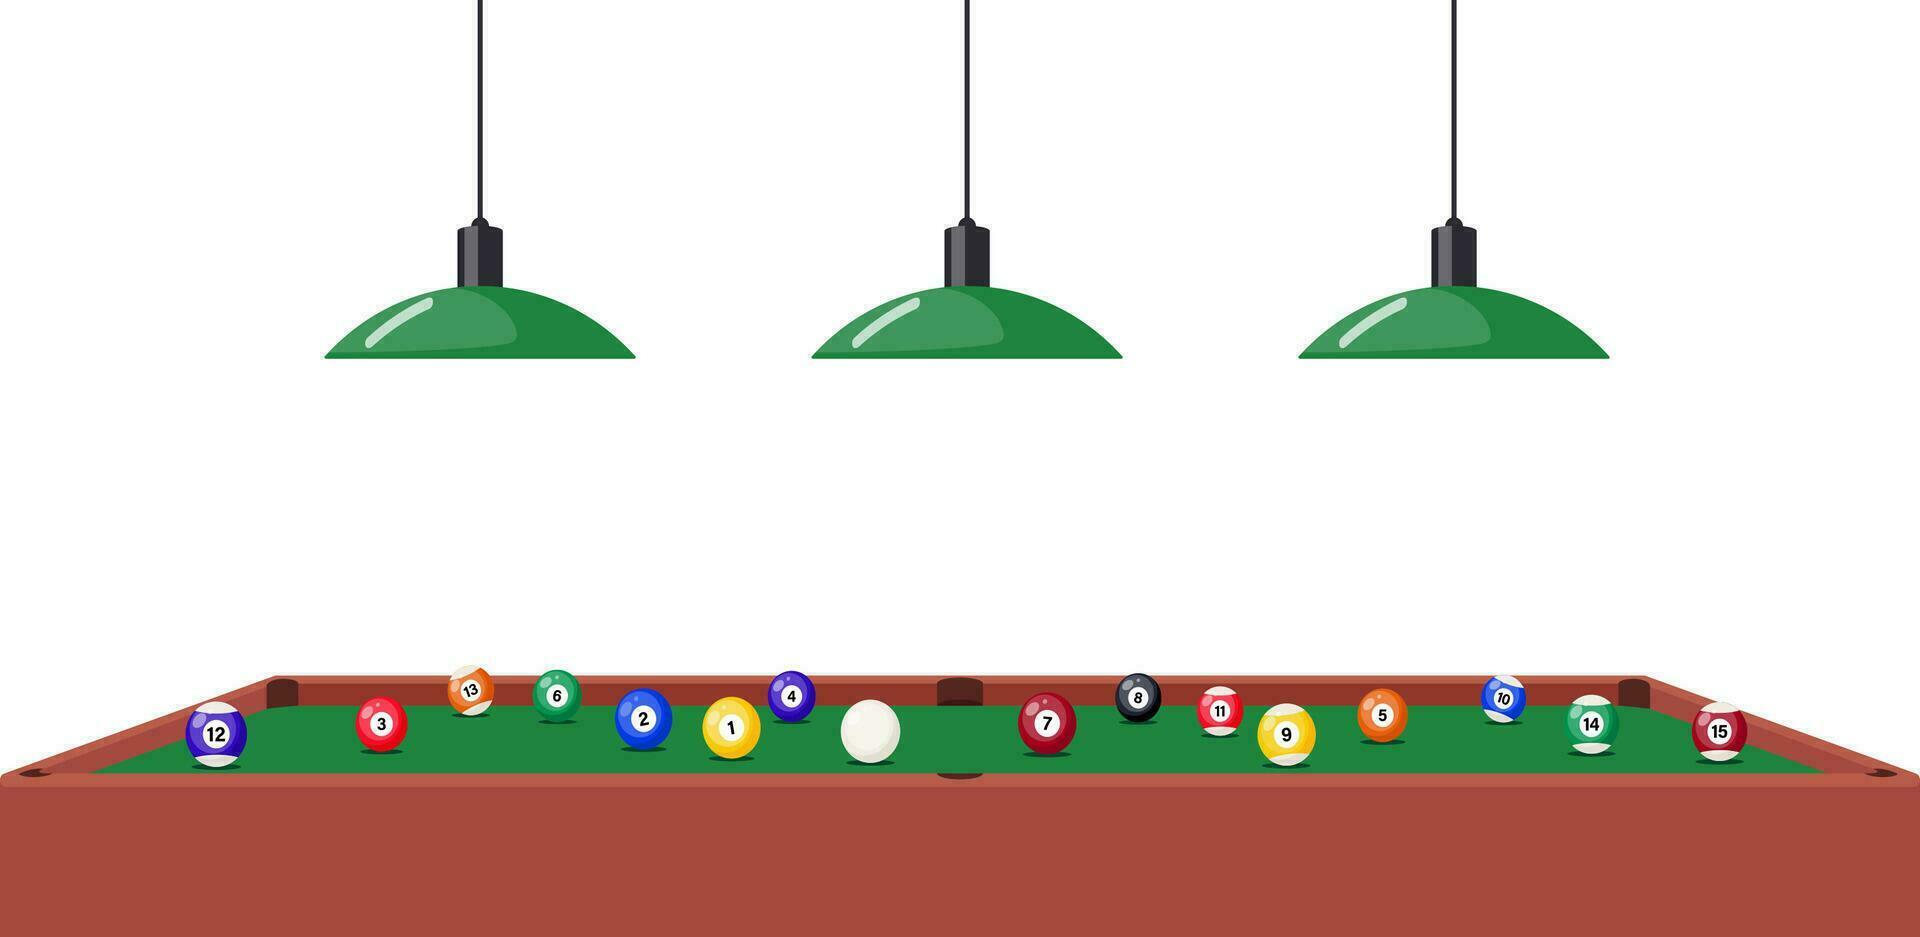 Pool Billiard table and hanging lamps under it, side view. Multi colored pool balls on billiard table. Vector illustration.